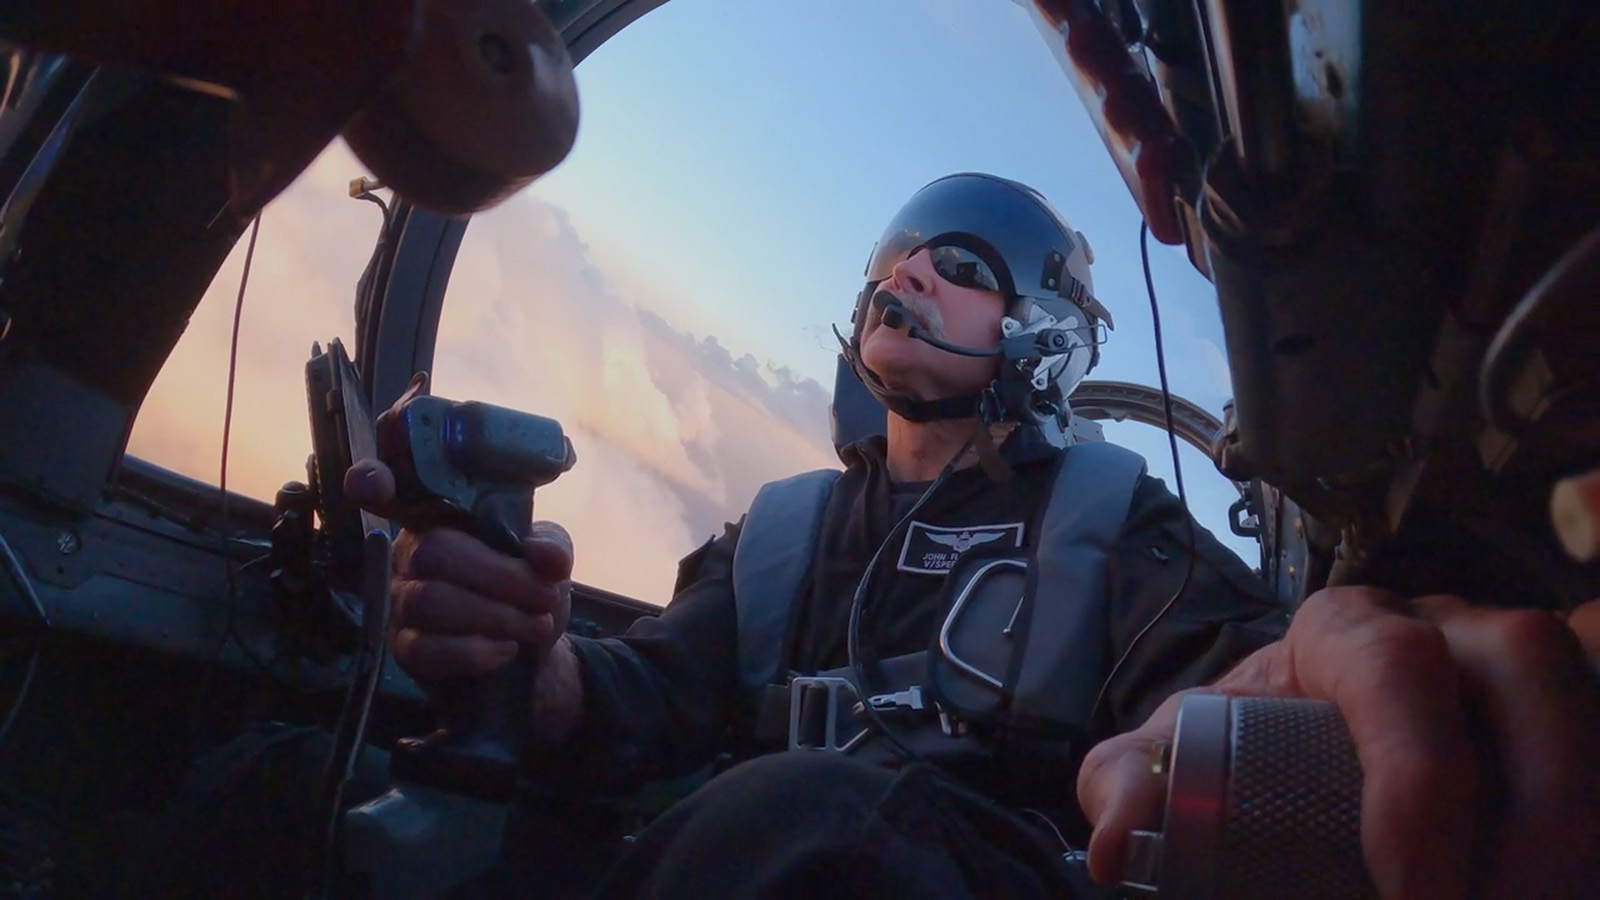 The right stuff. V/SPEED pushes the envelope to get footage that’s never been seen before.